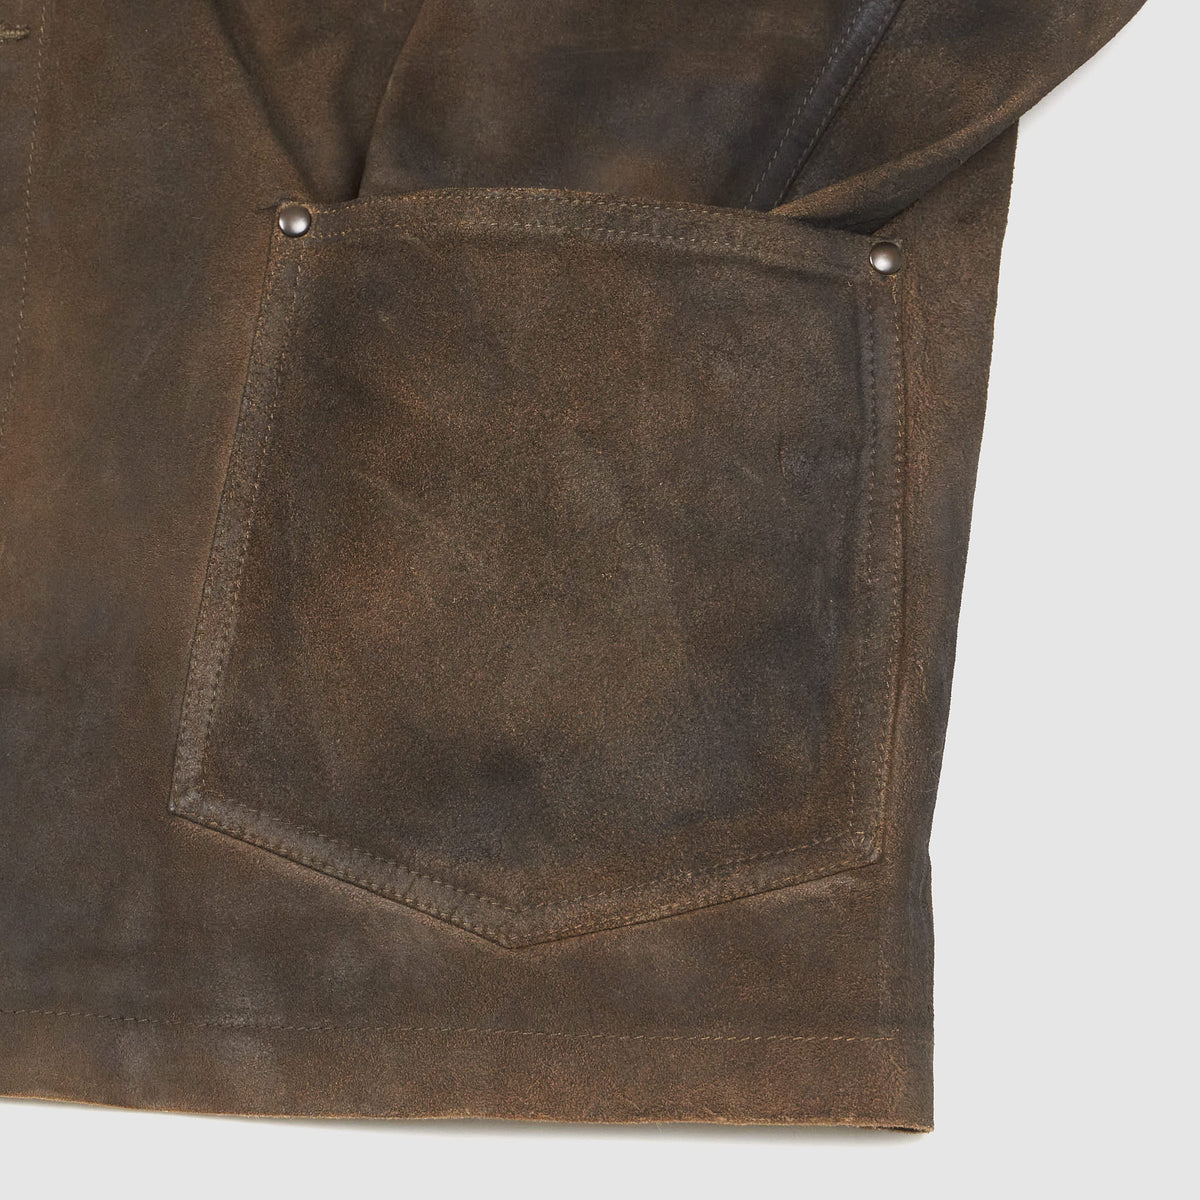 Double RL Roughout Unlined Leather Work Jacket